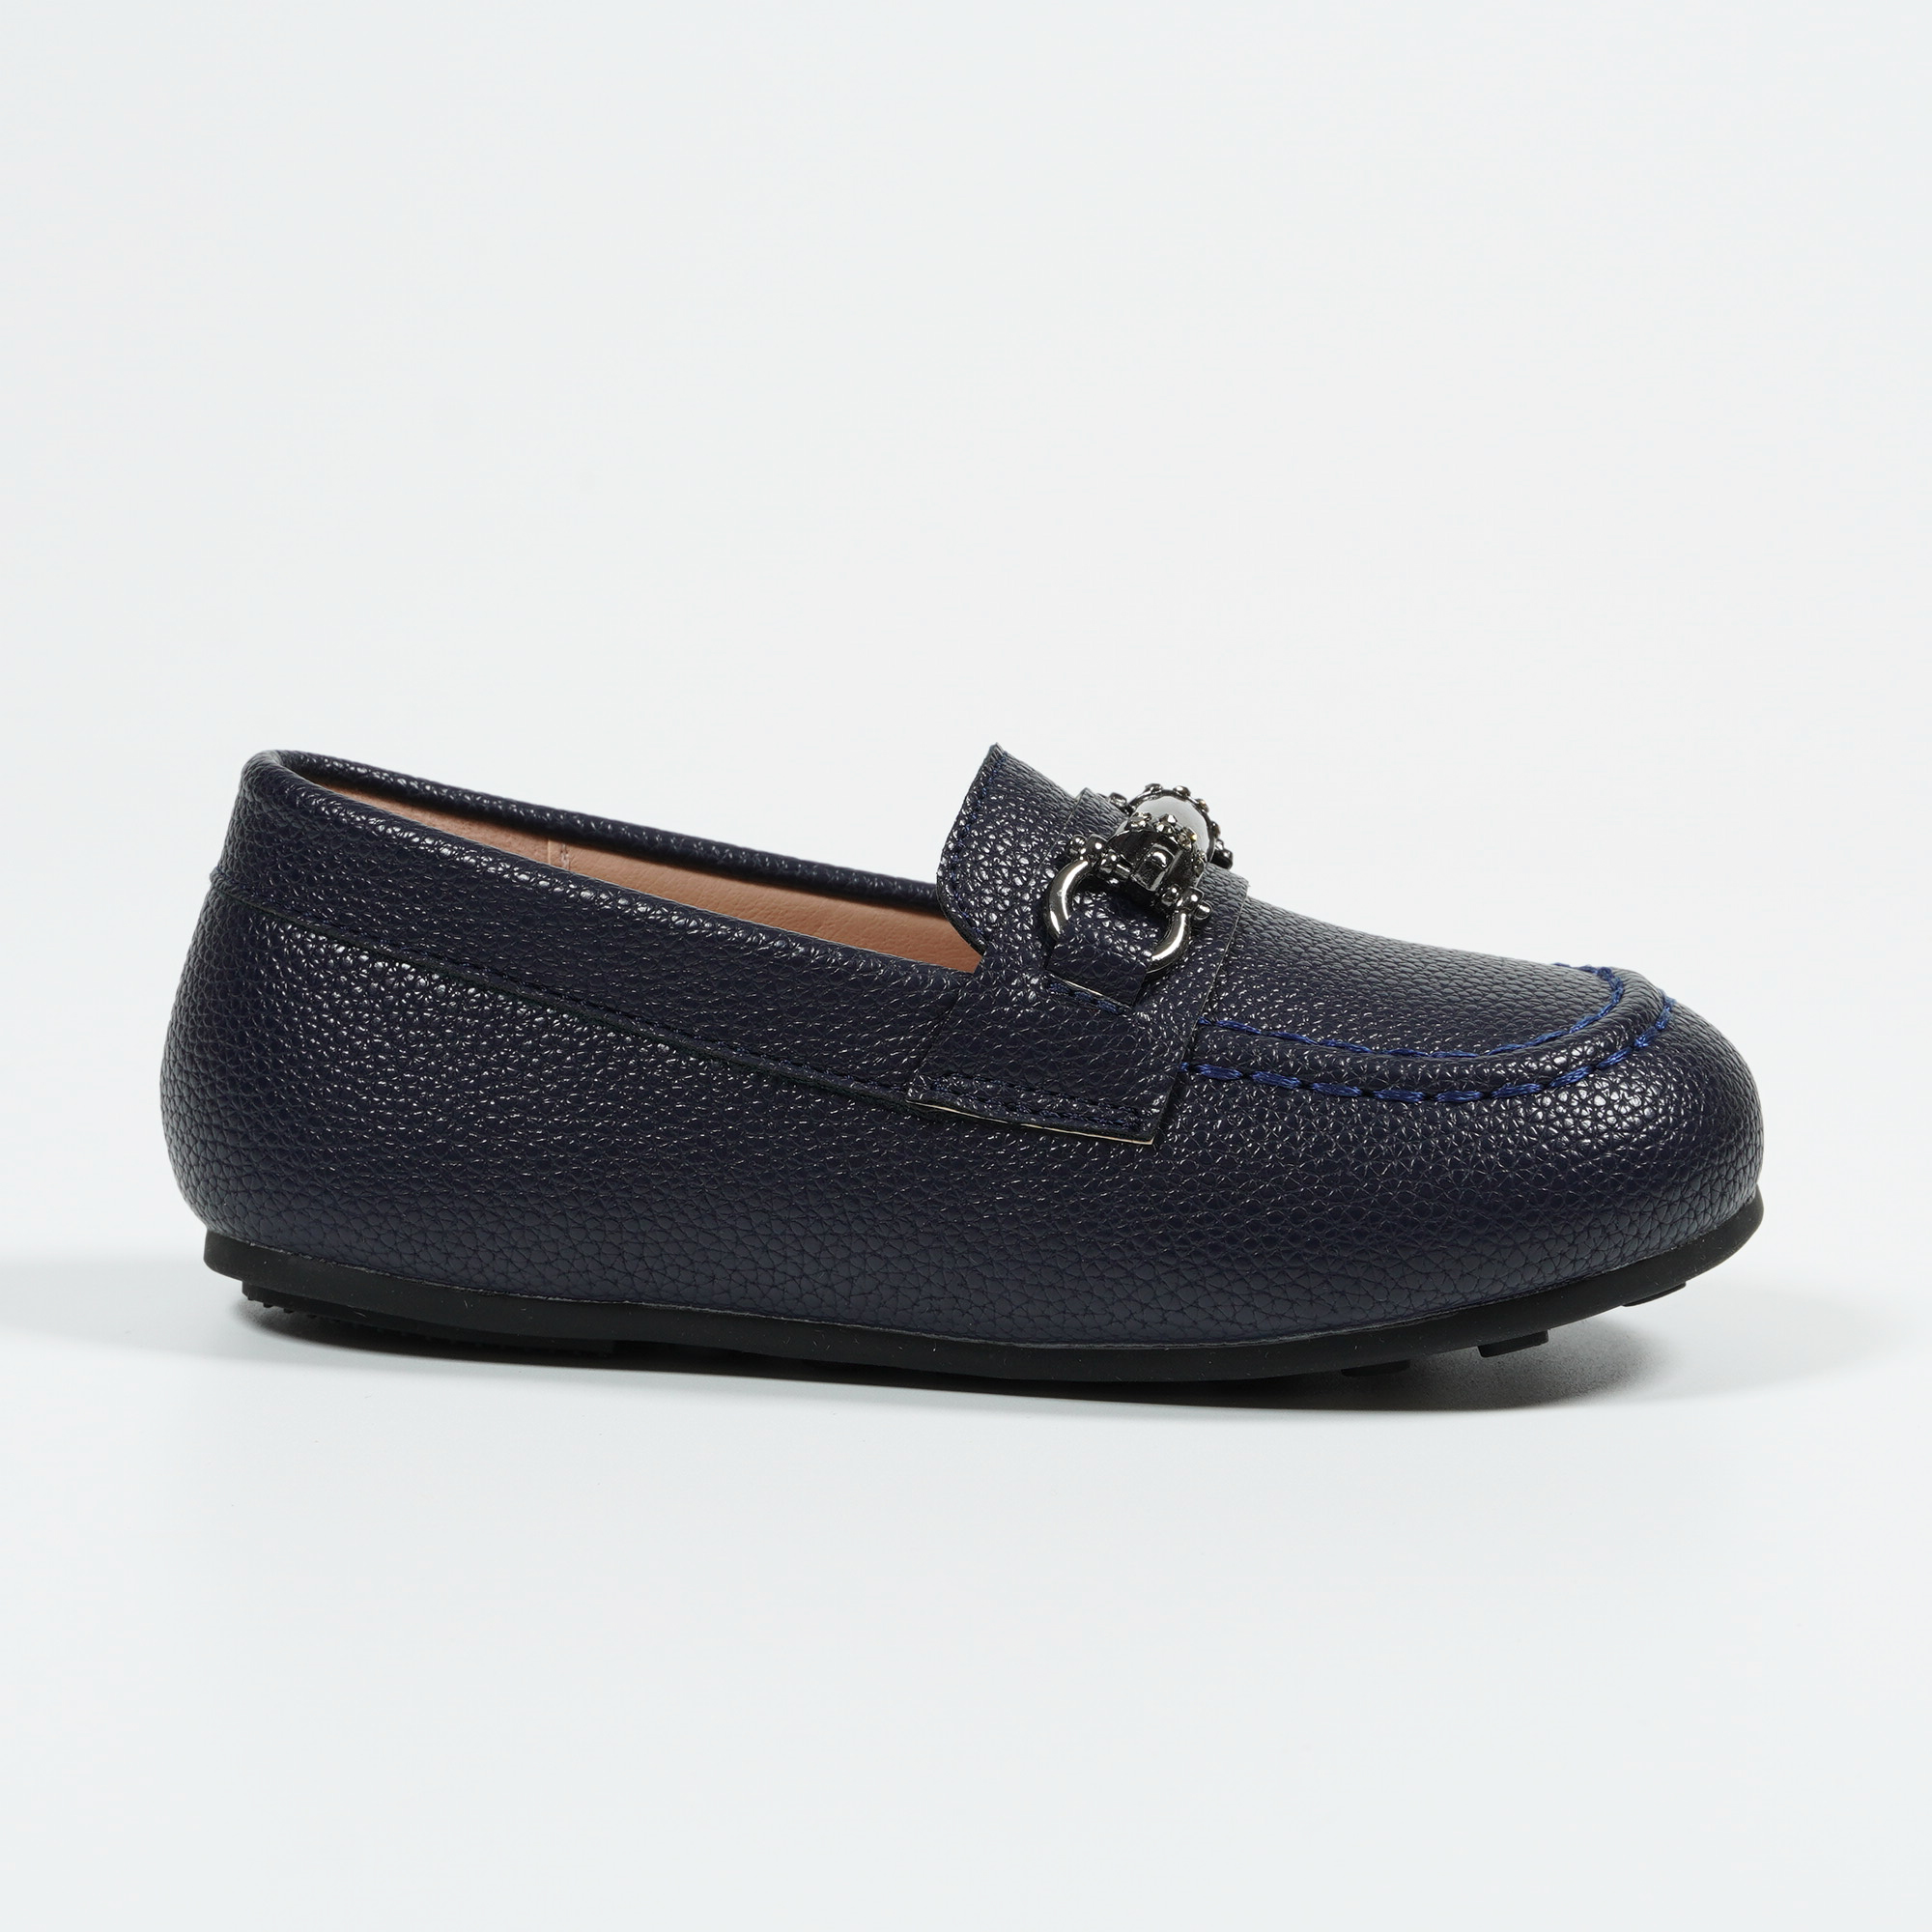 Nikoofly-Childrens-Fashion-Slip-Ons-Boys-Navy-Color-Loafers -Comfort-Formal-Dress-Shoes-HSA1108A-2